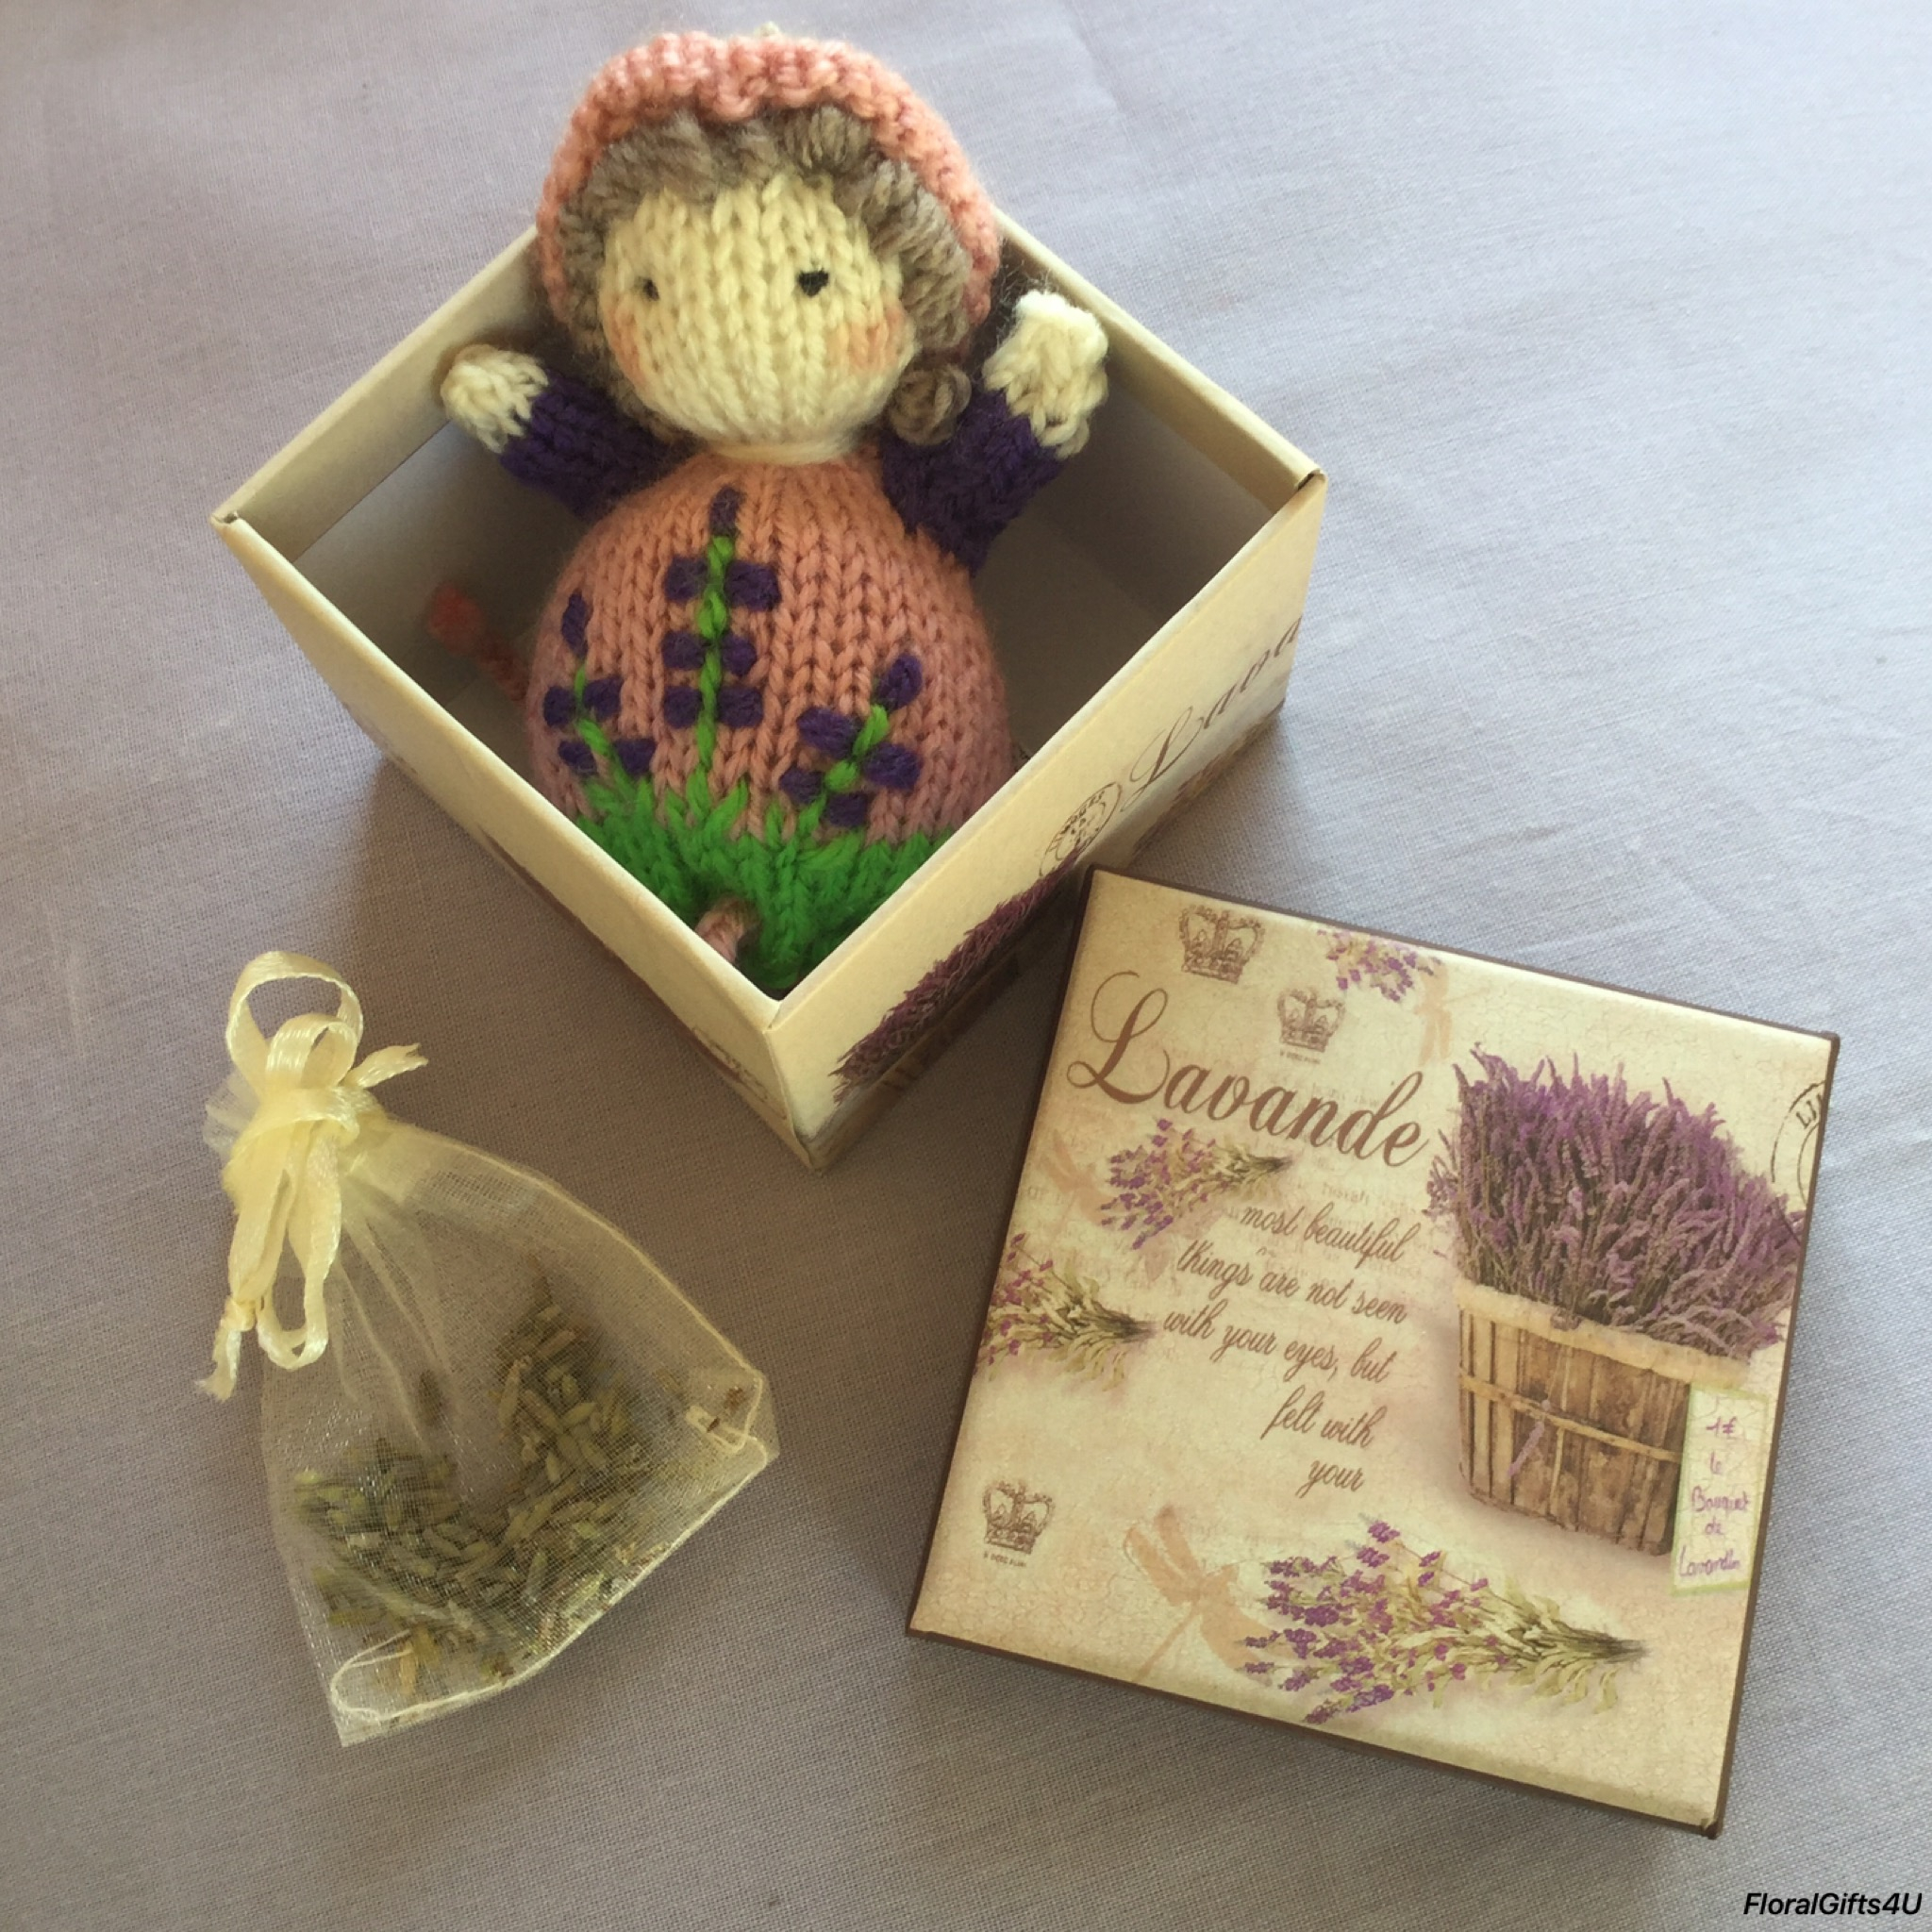 Knitted Sachet Pattern Small Hand Knitted Lavender Dolly Floralgifts4u In Square Box With Sachet Of Lavender C